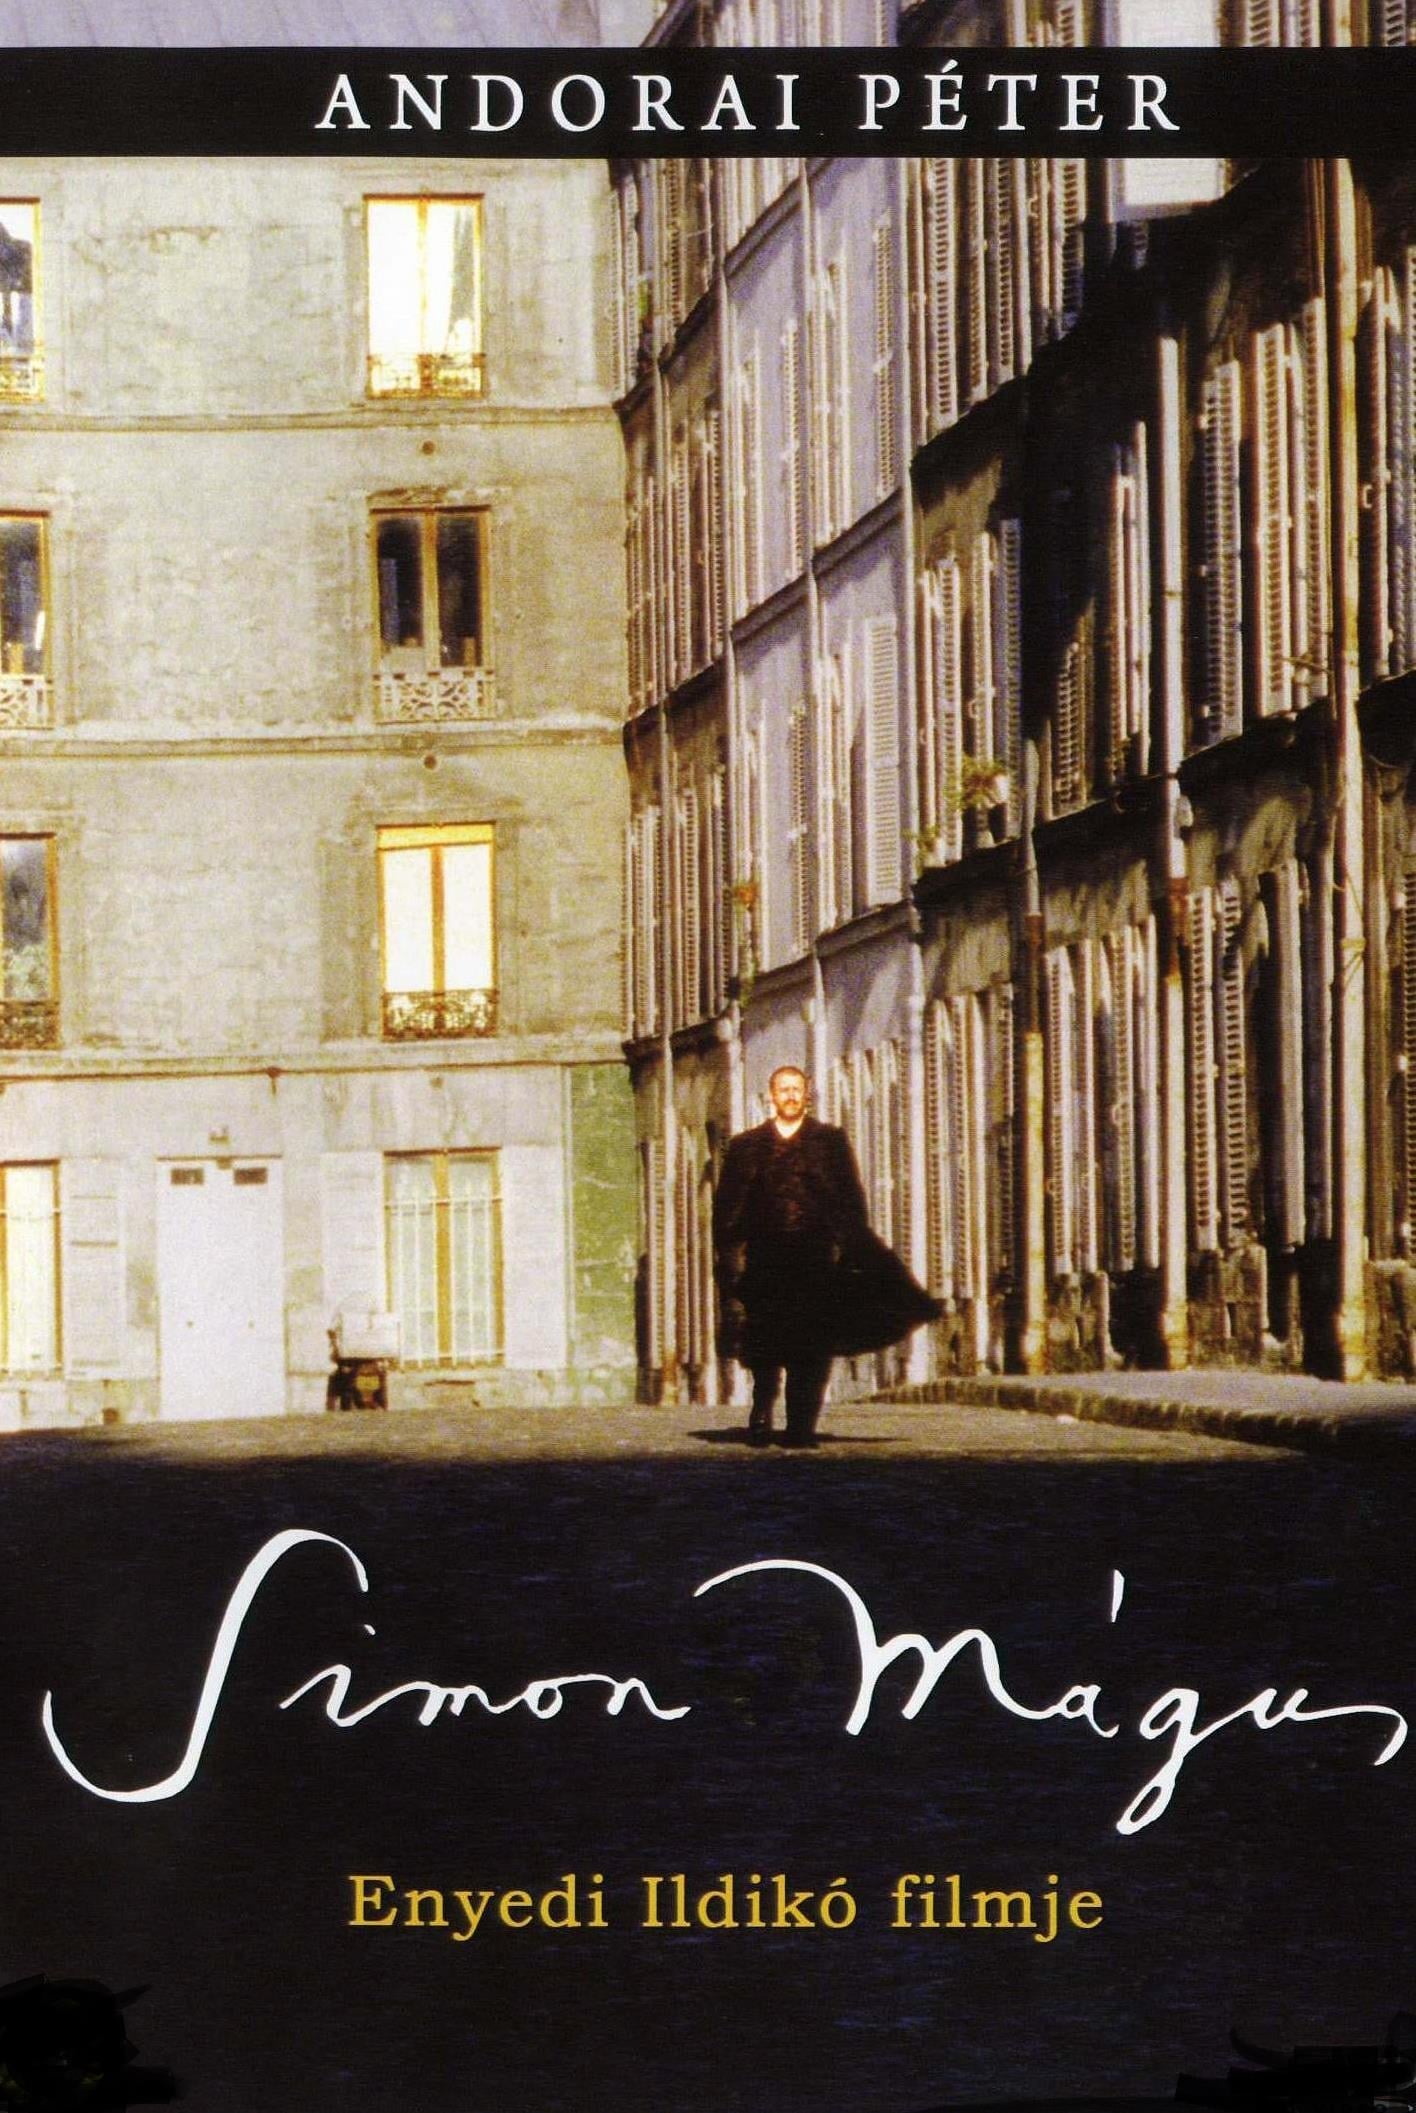 Watch Simon, the Magician (1999) Full Movie Online Free | Stream Free Movies & TV Shows